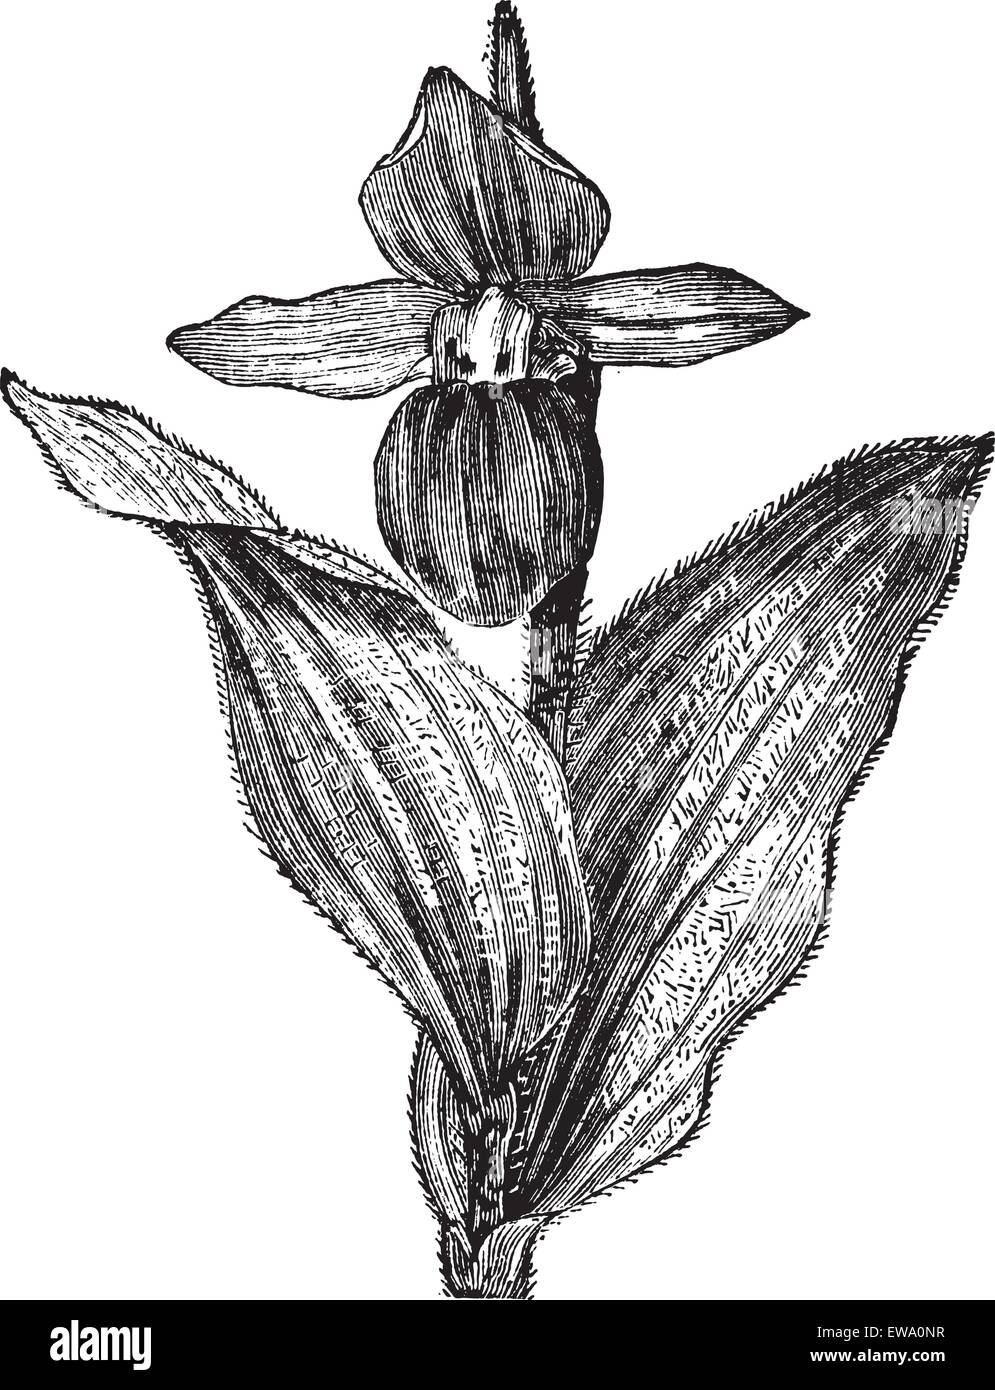 Lady's Slipper Orchid or Lady Slipper Orchid or Slipper Orchid or Cypripedium spectabile, vintage engraving. Old engraved illustration of a Lady's Slipper Orchid showing flower. Stock Vector